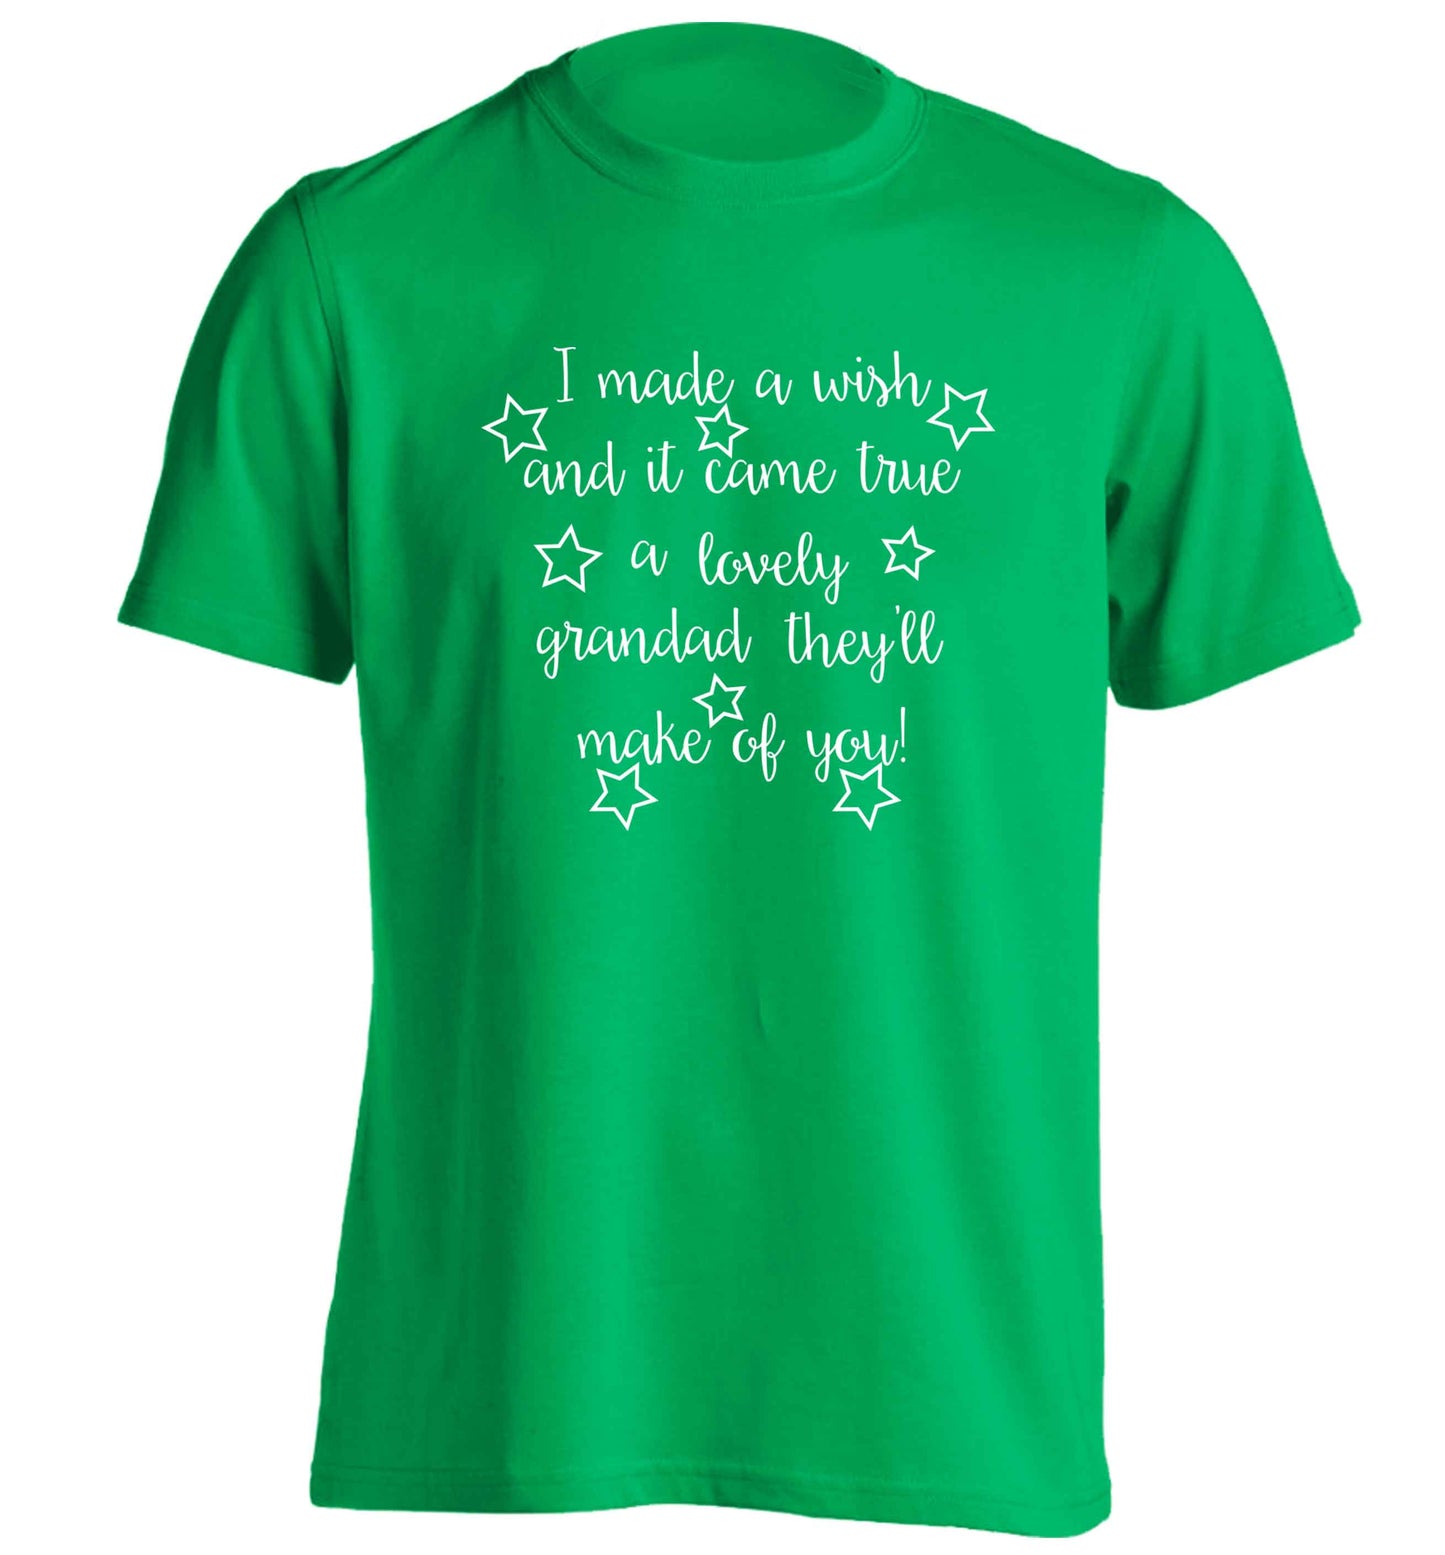 I made a wish and it came true a lovely grandad they'll make of you! adults unisex green Tshirt 2XL